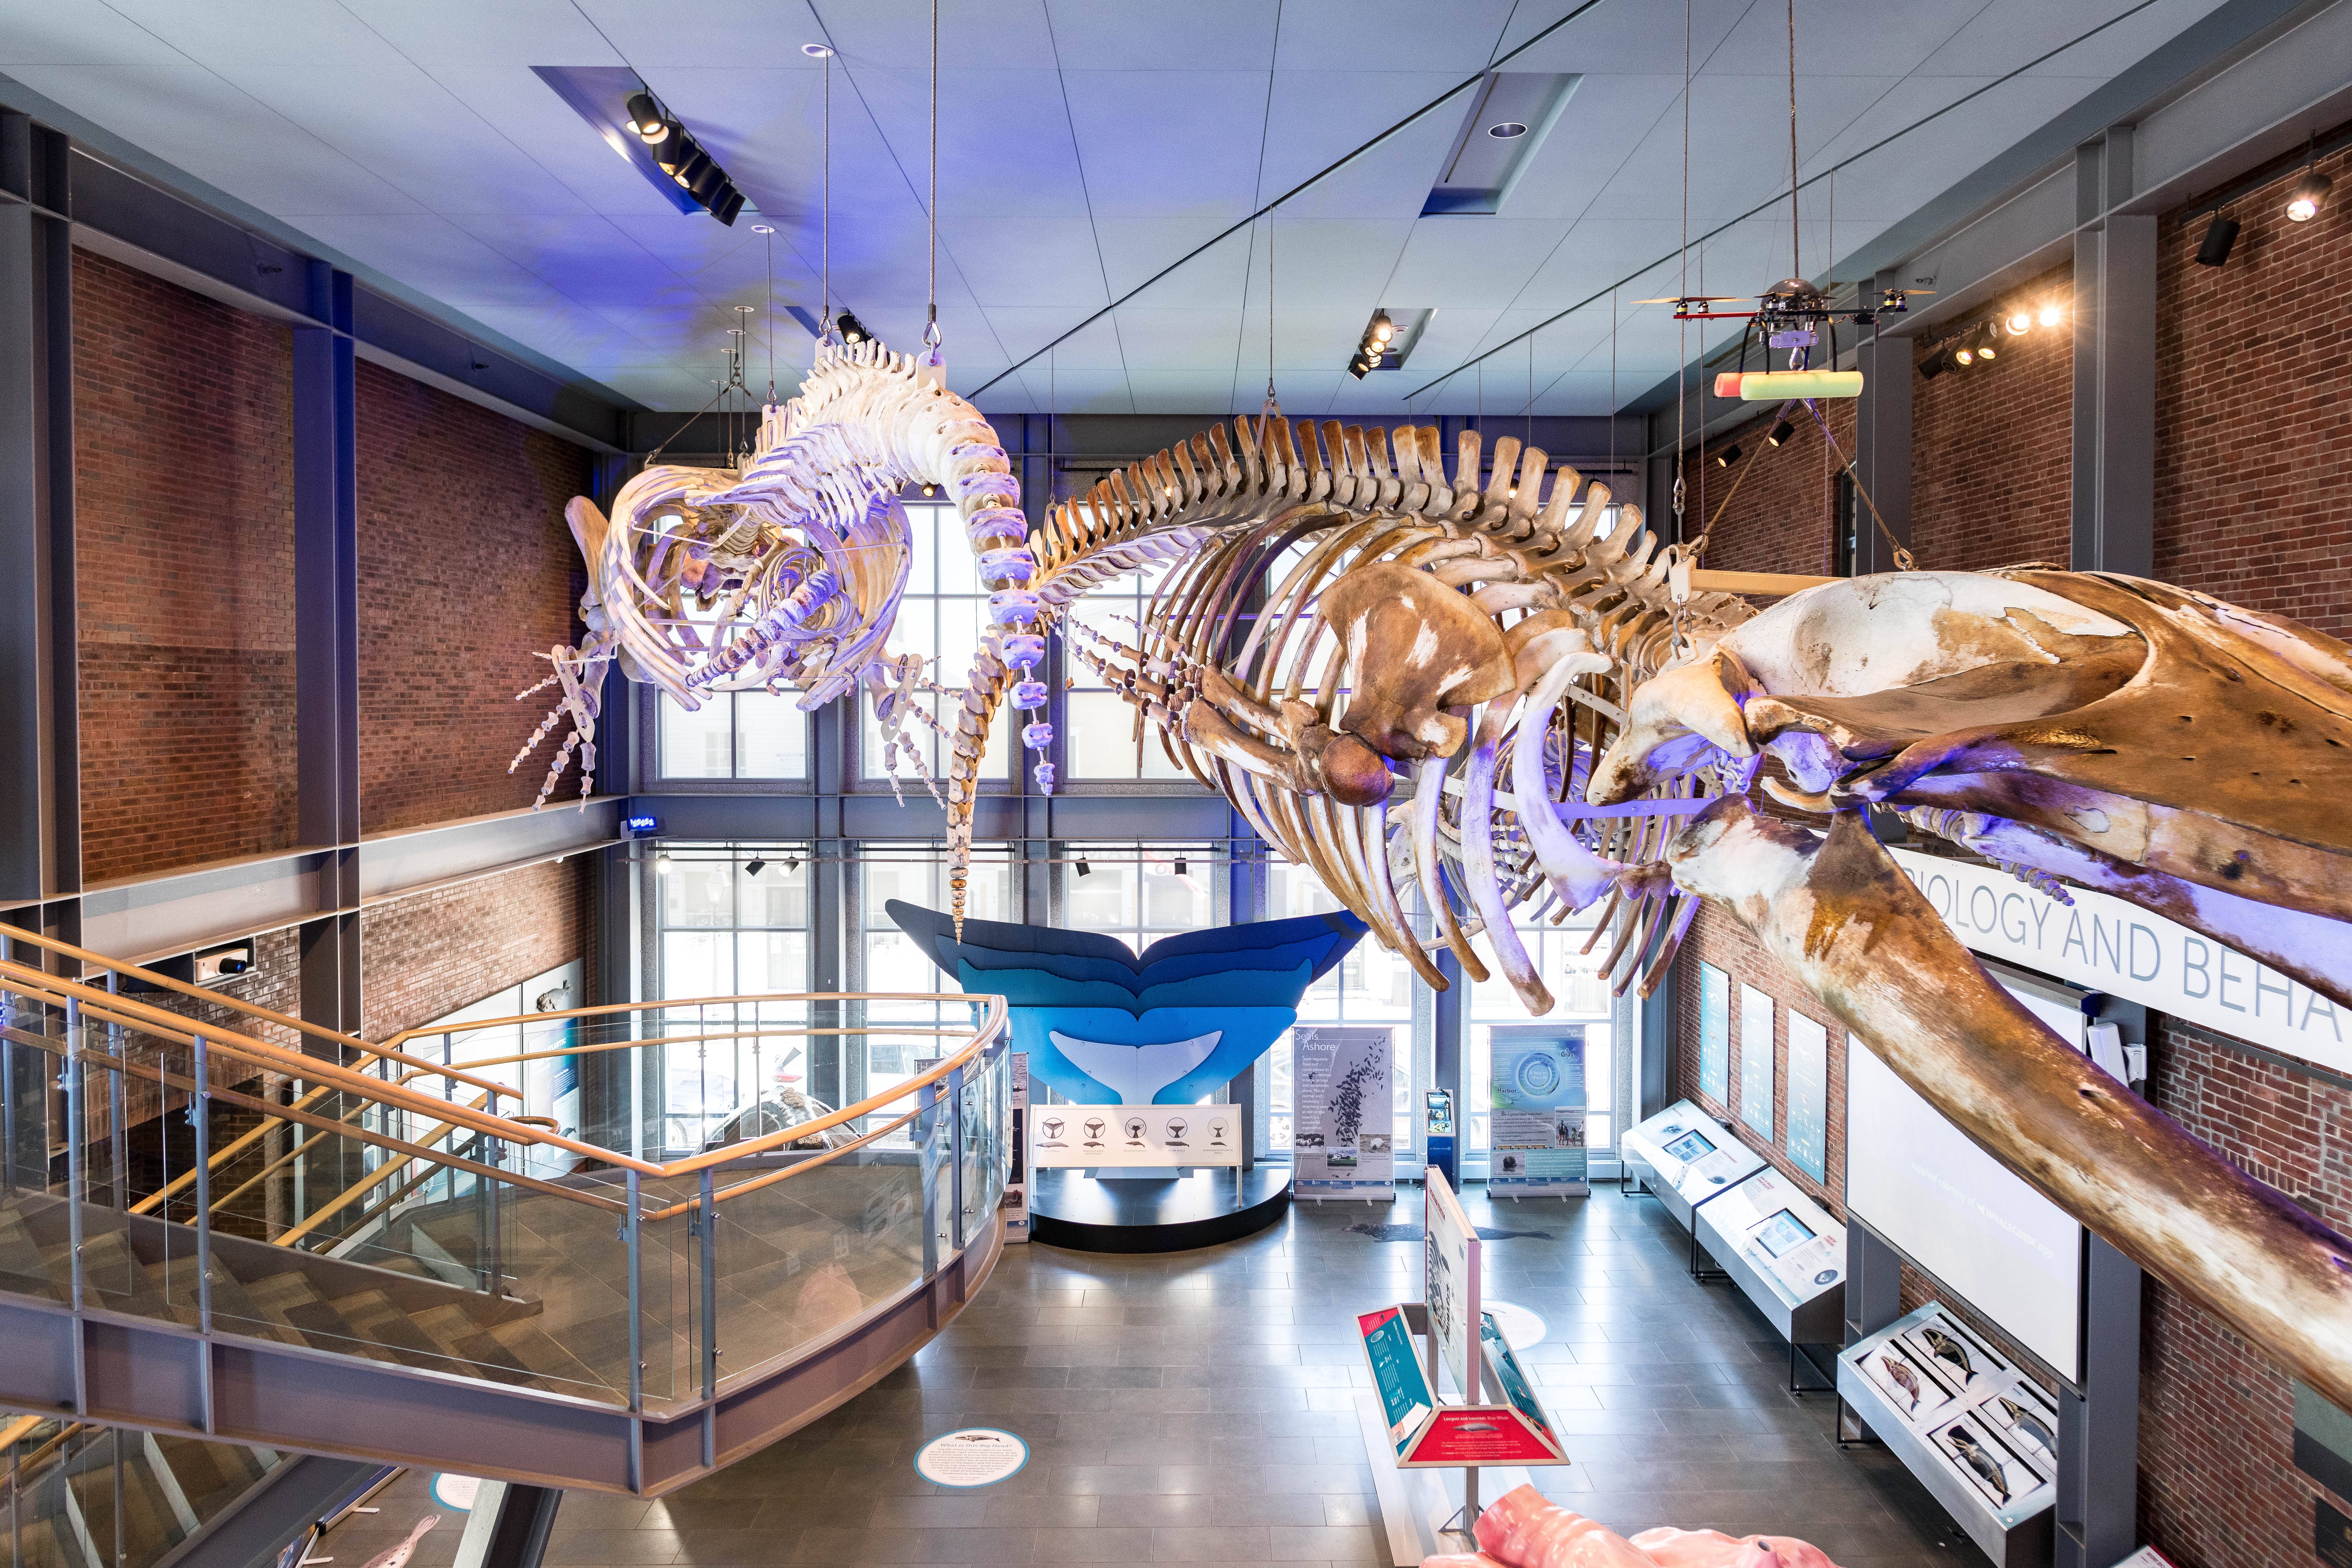 The New Bedford Whaling Museum merges history, science and art to explore the city's rich history as a seaport. (Courtesy the New Bedford Whaling Museum)